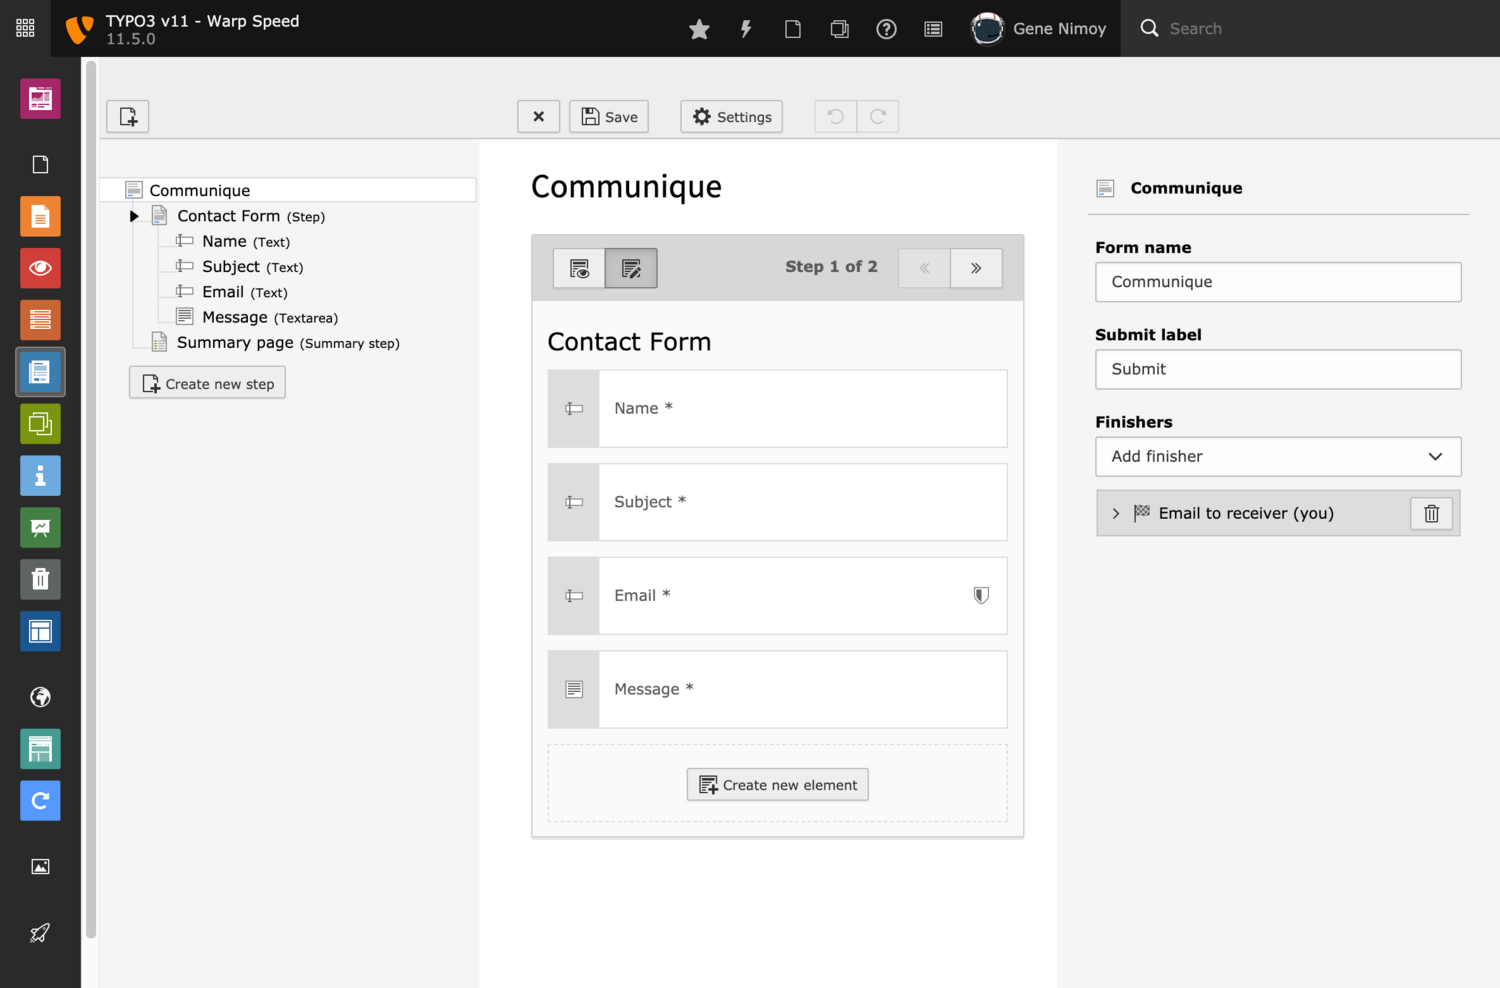 The form manager follows the general look and feel of TYPO3 v11